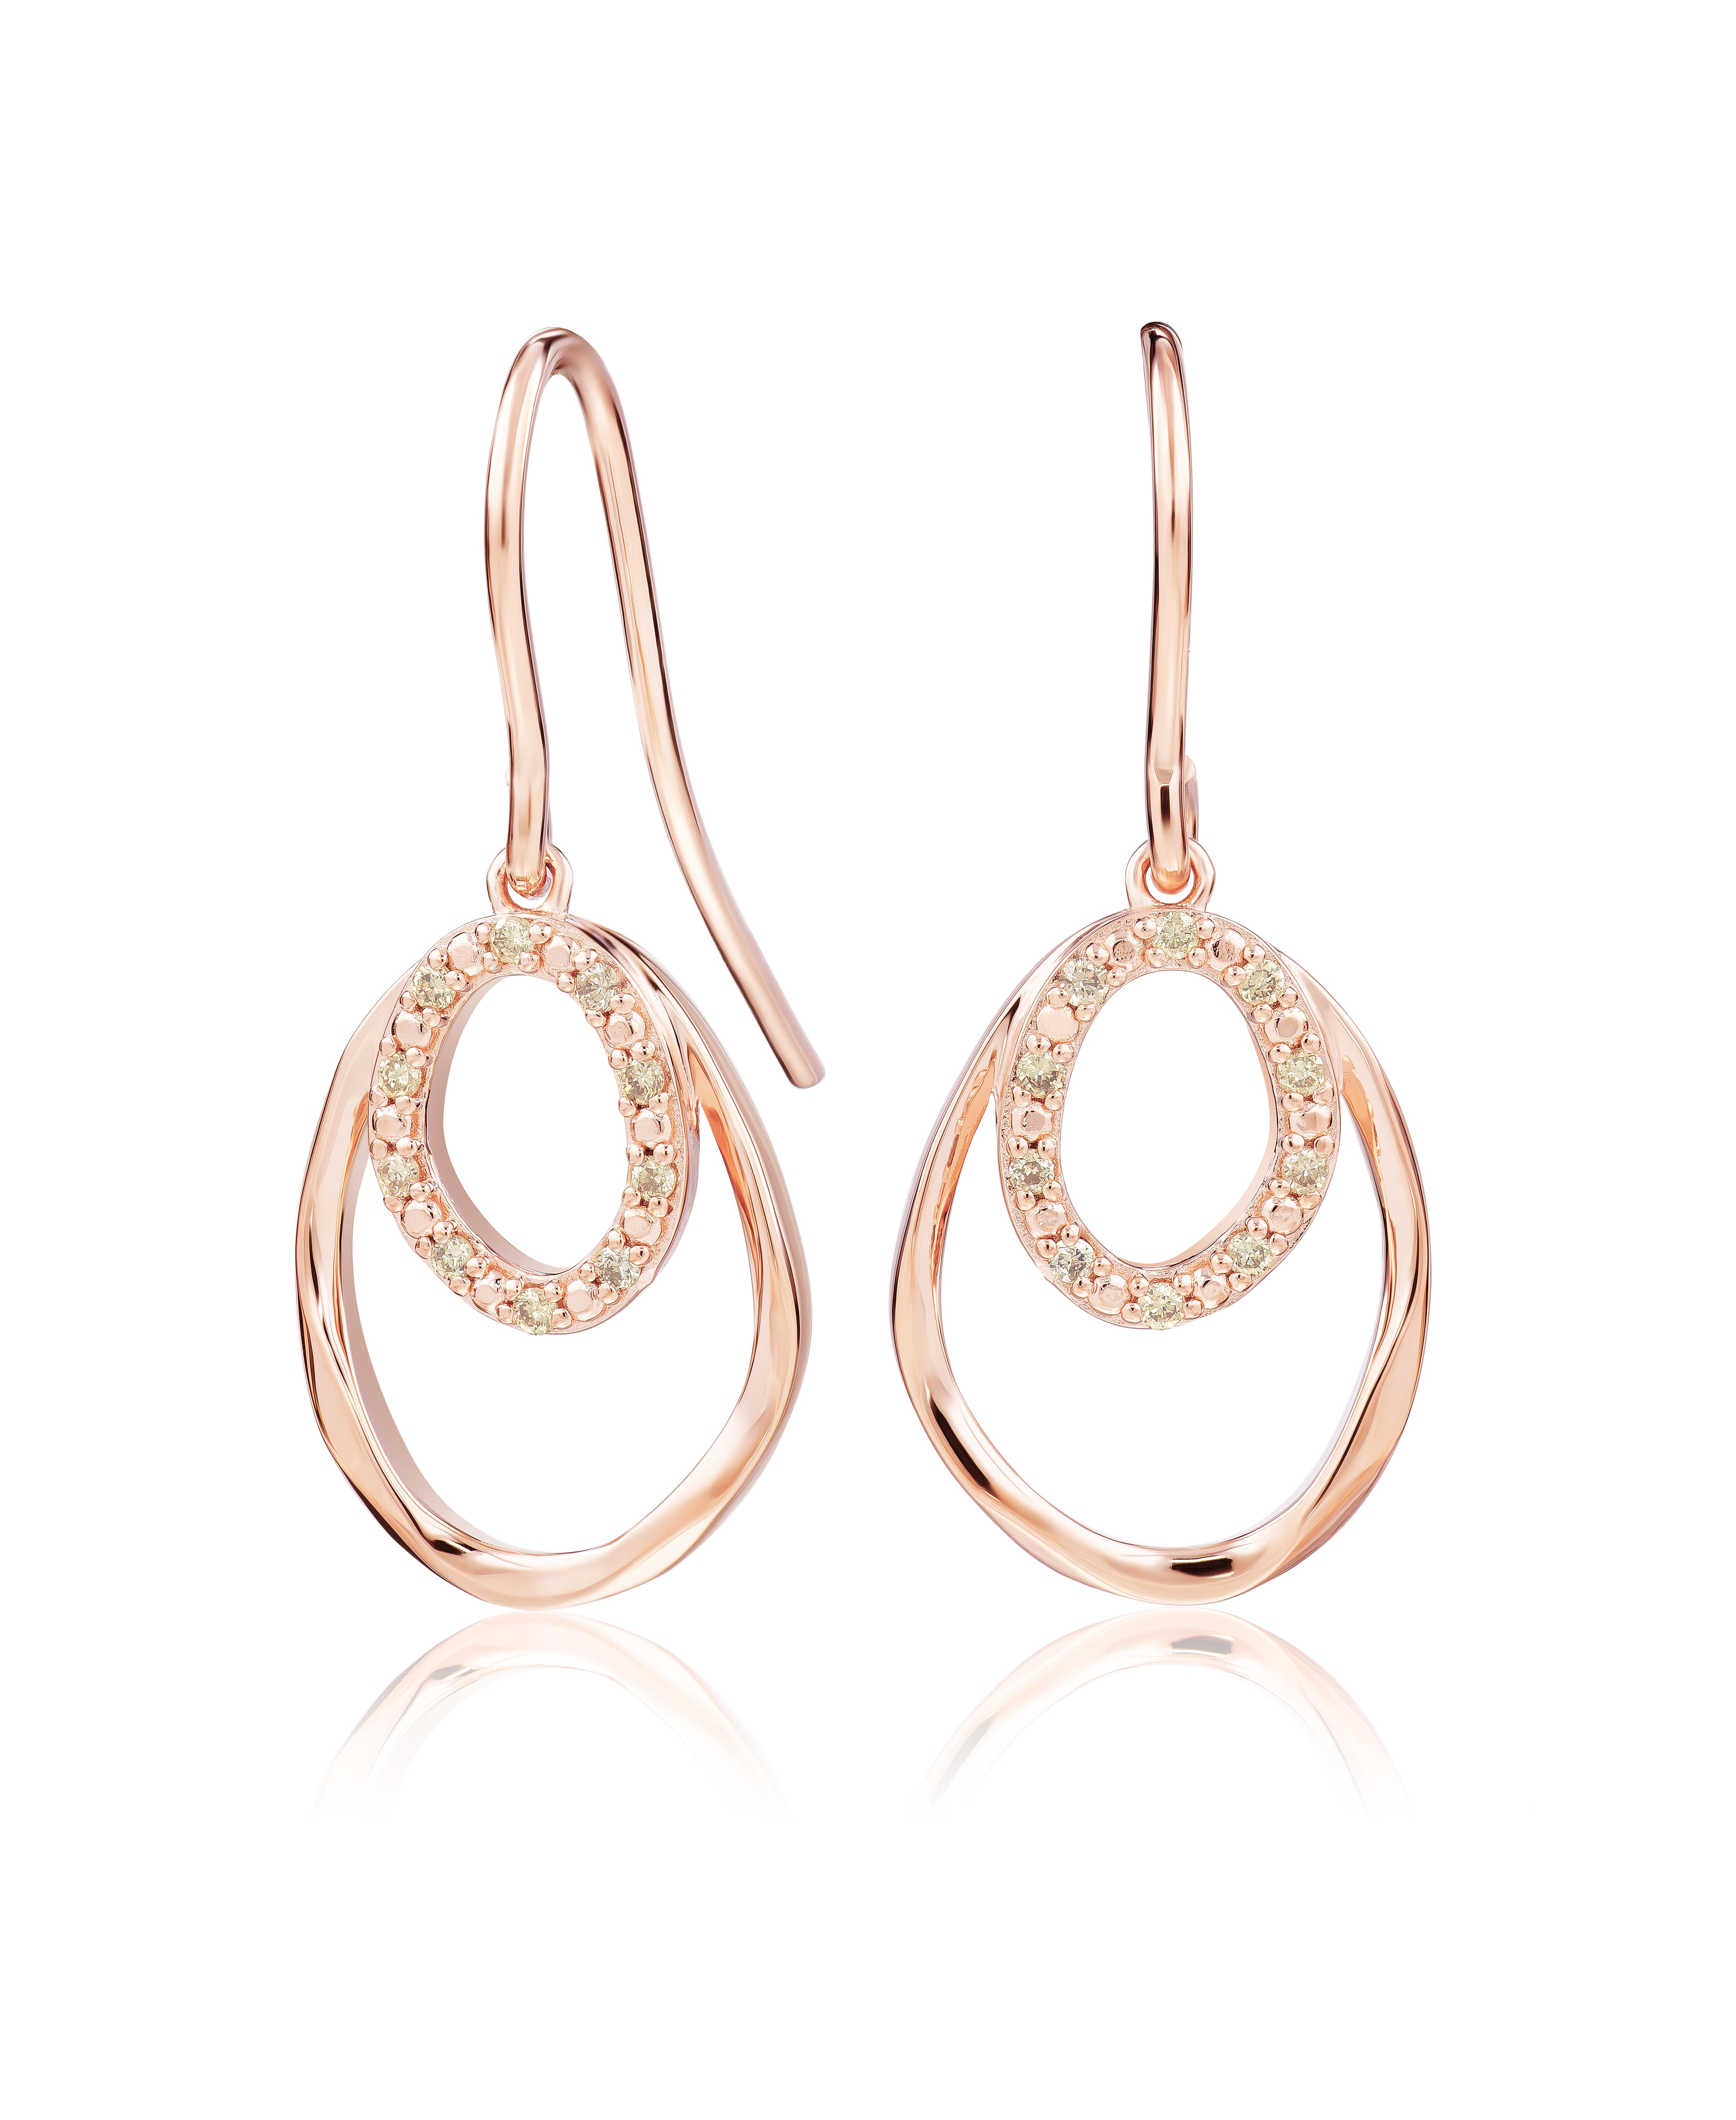 Enhance your style and embrace the allure of the 40M01706-RG sterling silver earrings. These exquisite earrings feature 20 natural brown diamonds, weighing a total of 0.10 carats, that radiate elegance and charm.

Crafted with sterling silver, these